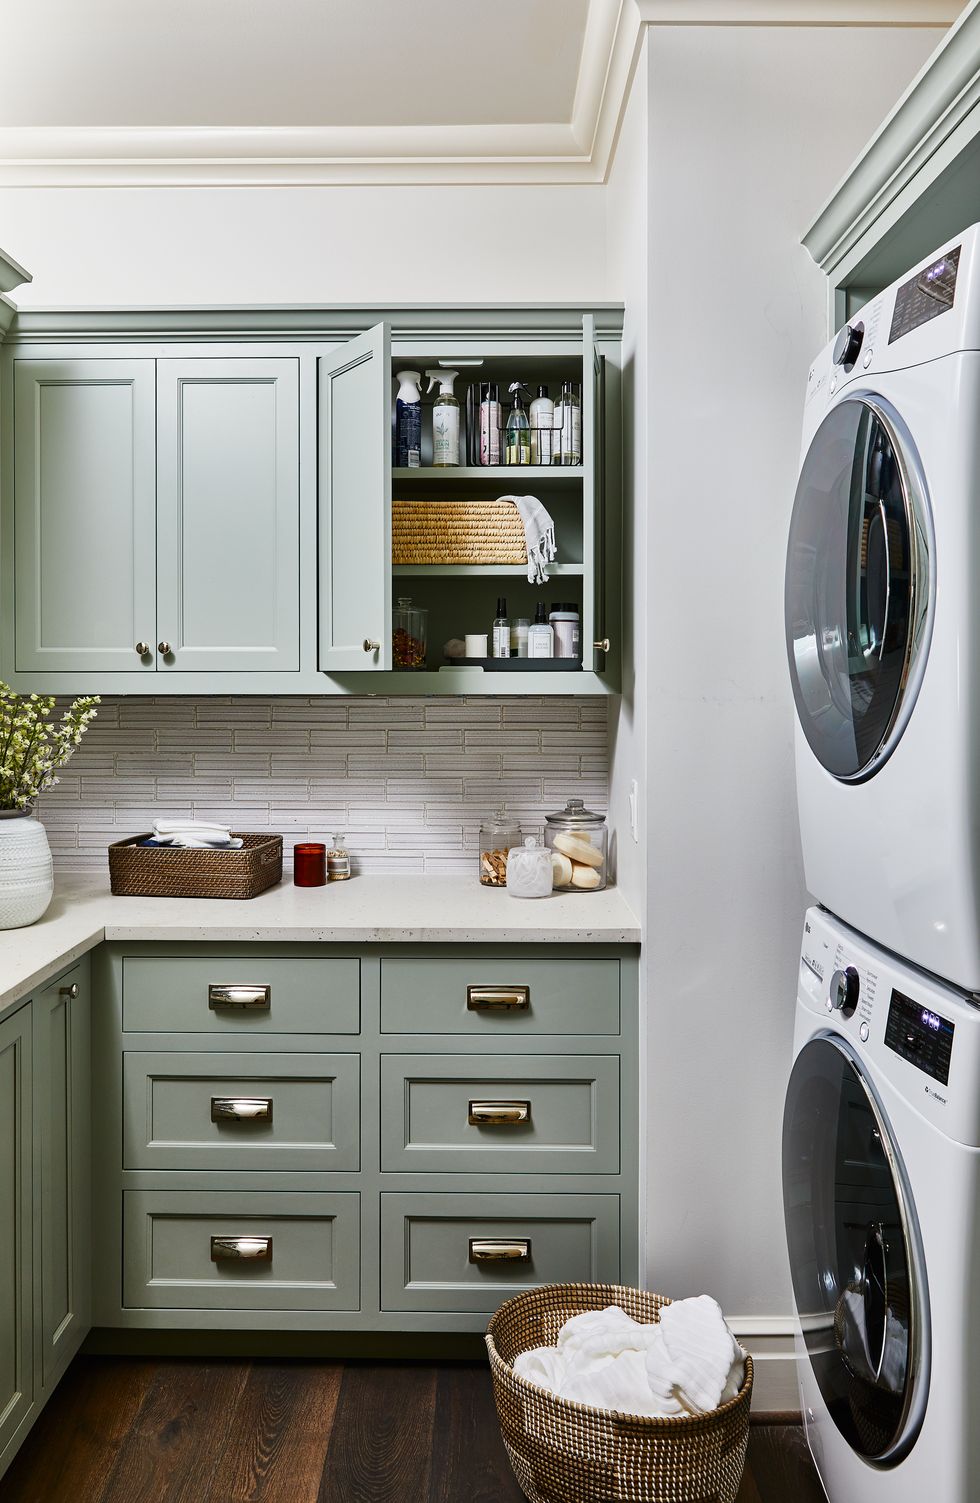 Laundry room, Room, Furniture, Cabinetry, Countertop, Major appliance, Kitchen, Laundry, Property, Shelf, 